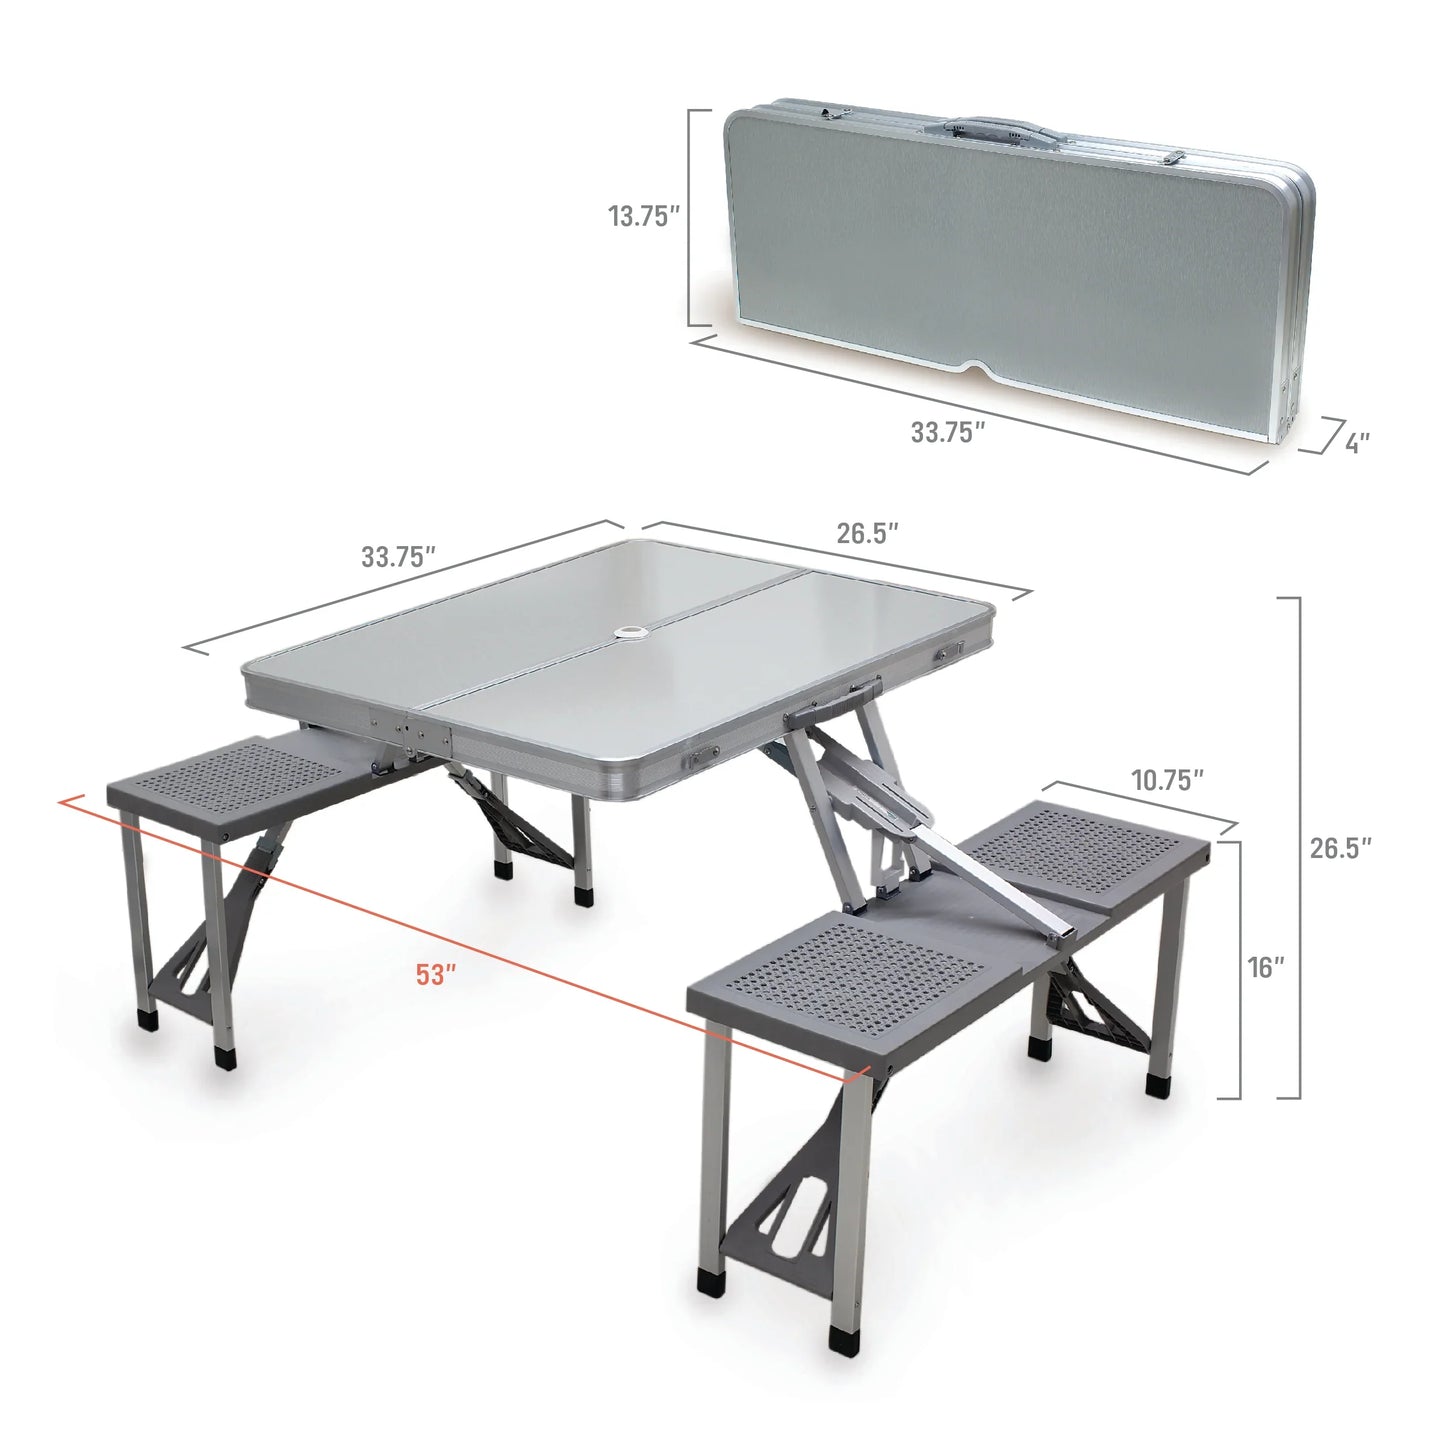 Portable Picnic Table With Seats - The Wash Shop